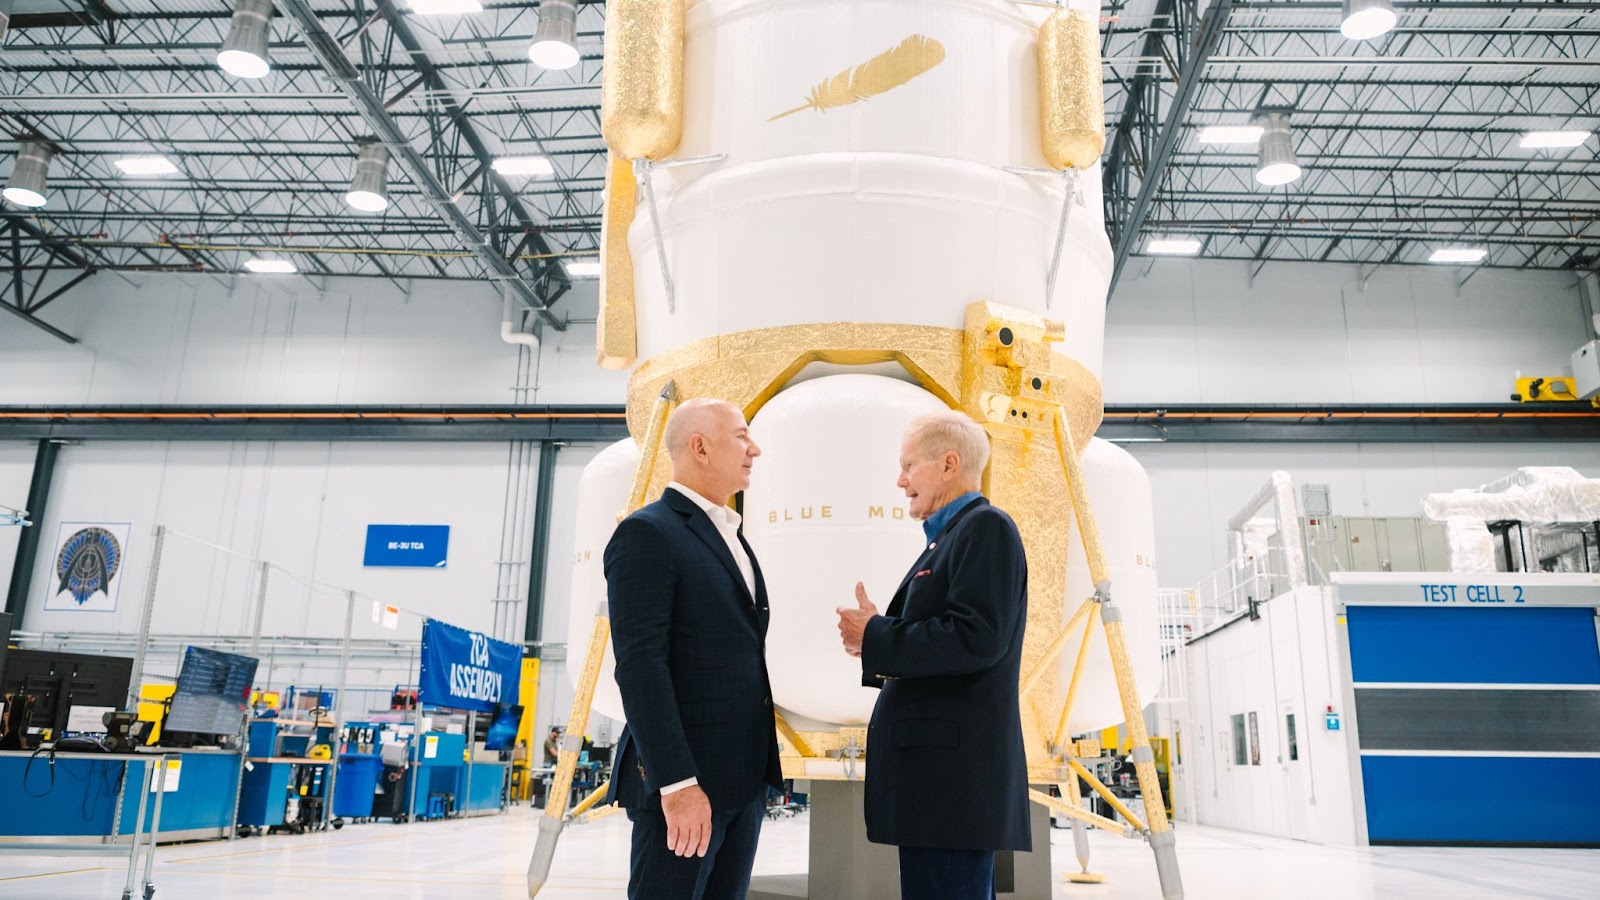 Two men in suits talking in front of a large spacecraft.